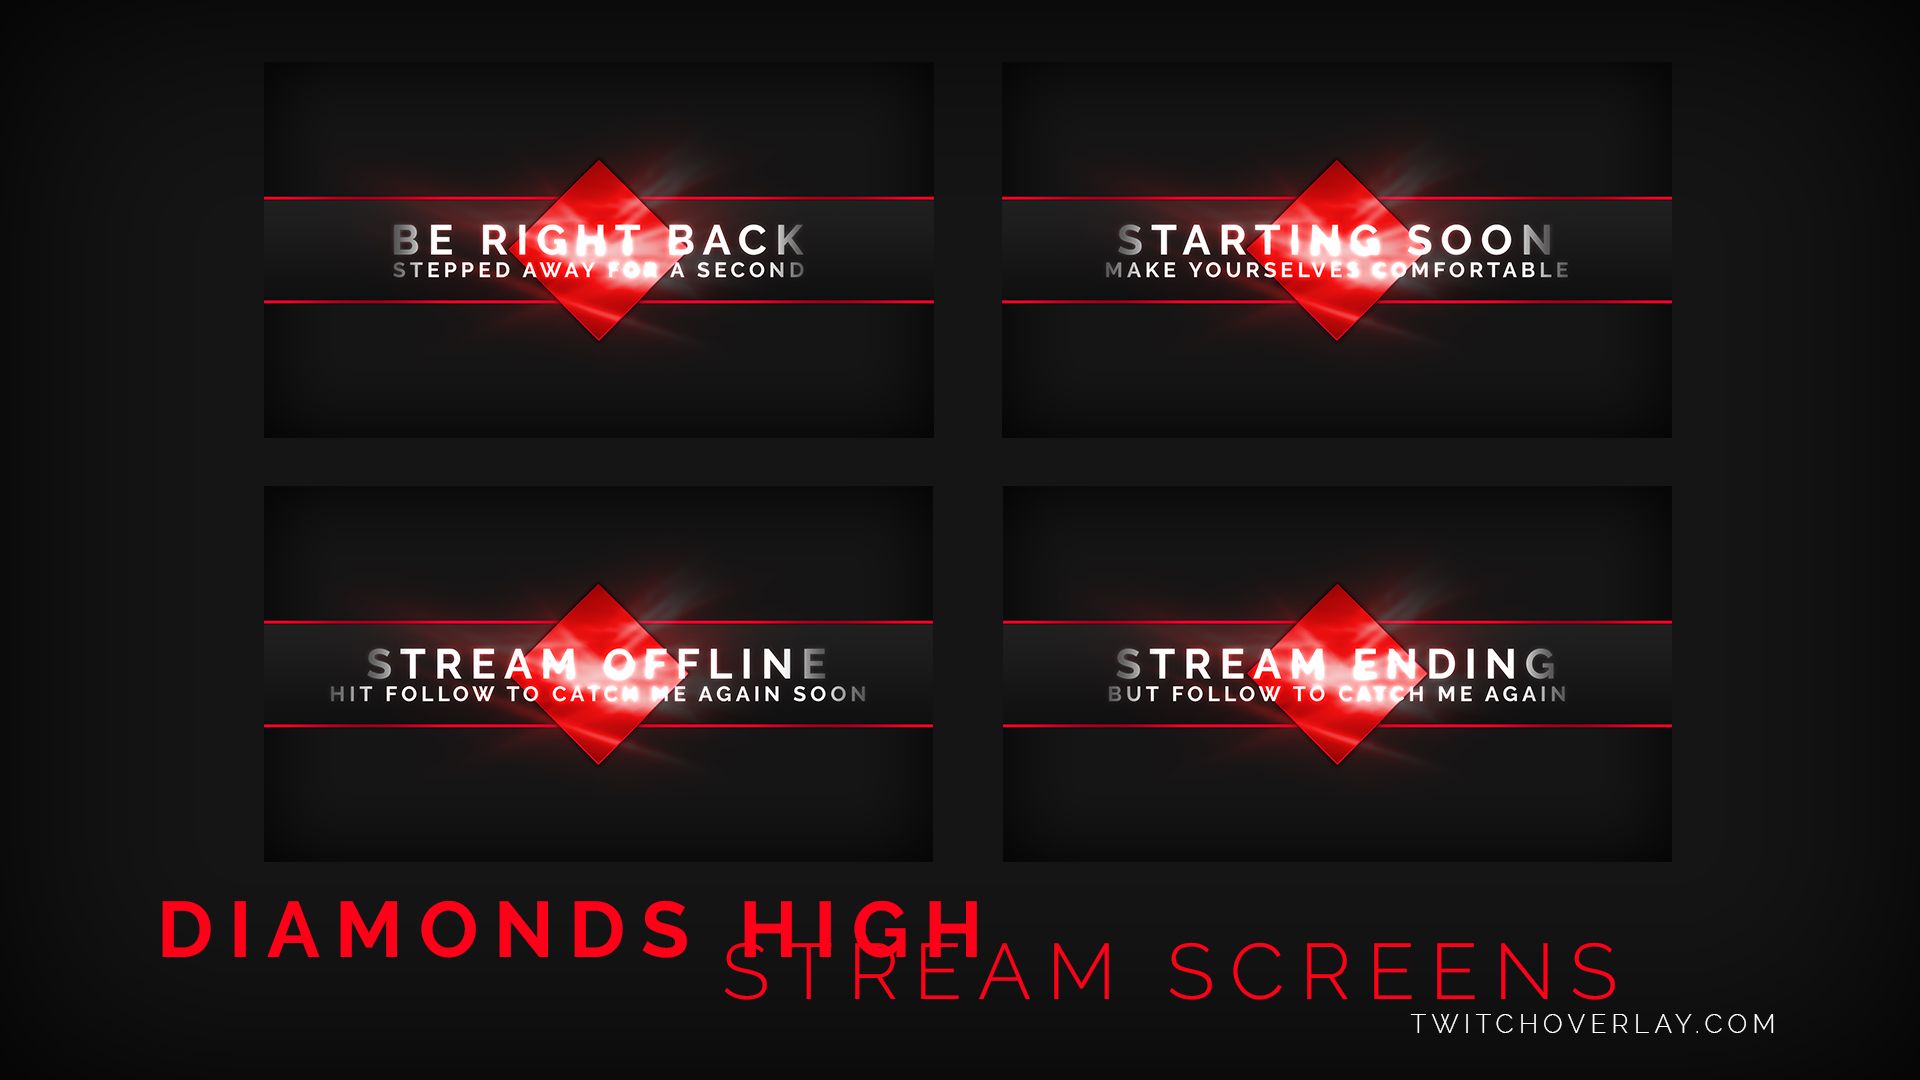 Free Stream Starting Soon & BRB Screens for Twitch